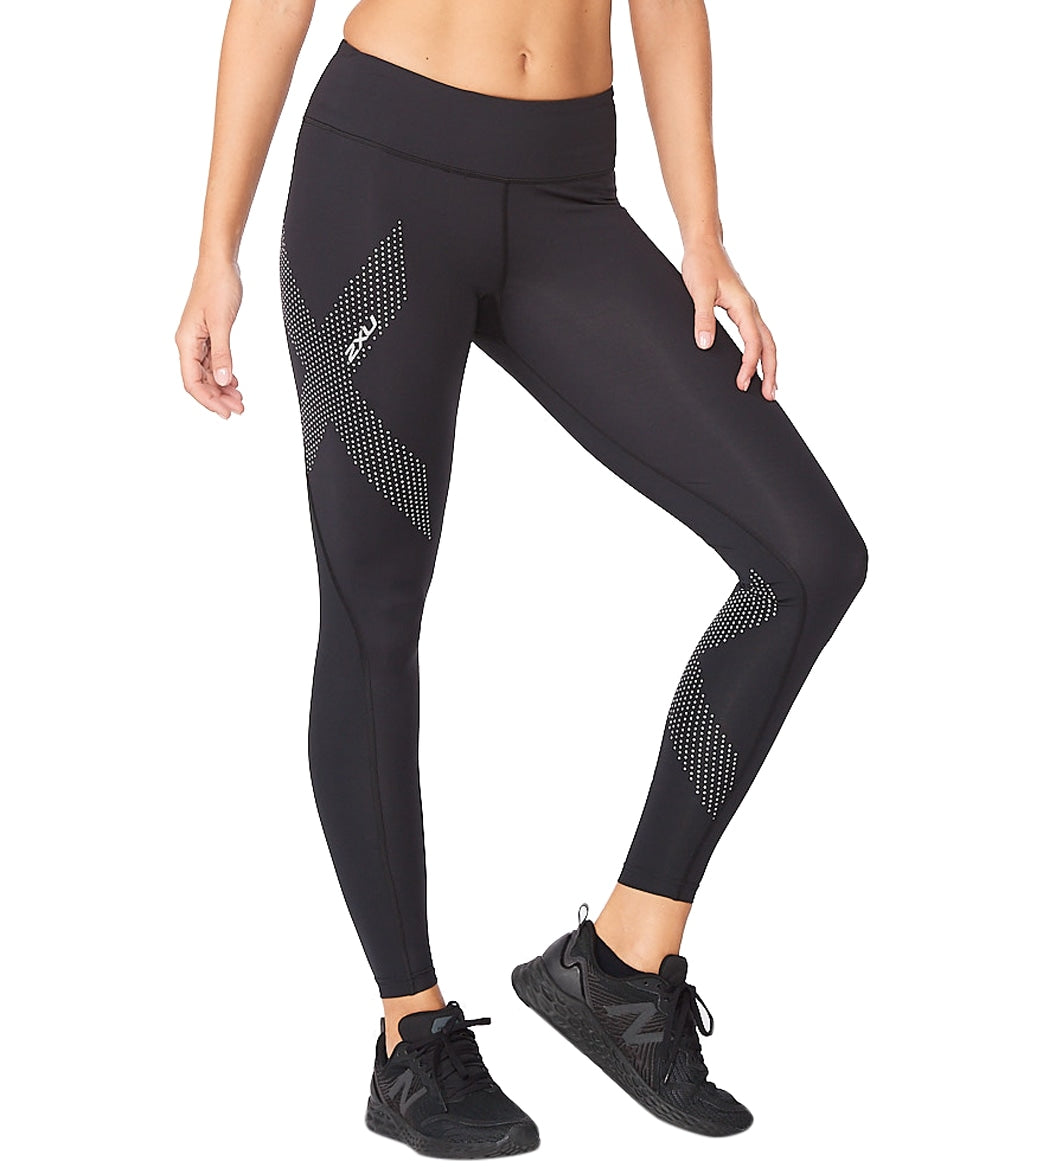 2XU Compression Tights Women's Mid-Rise Workout Pants, Black